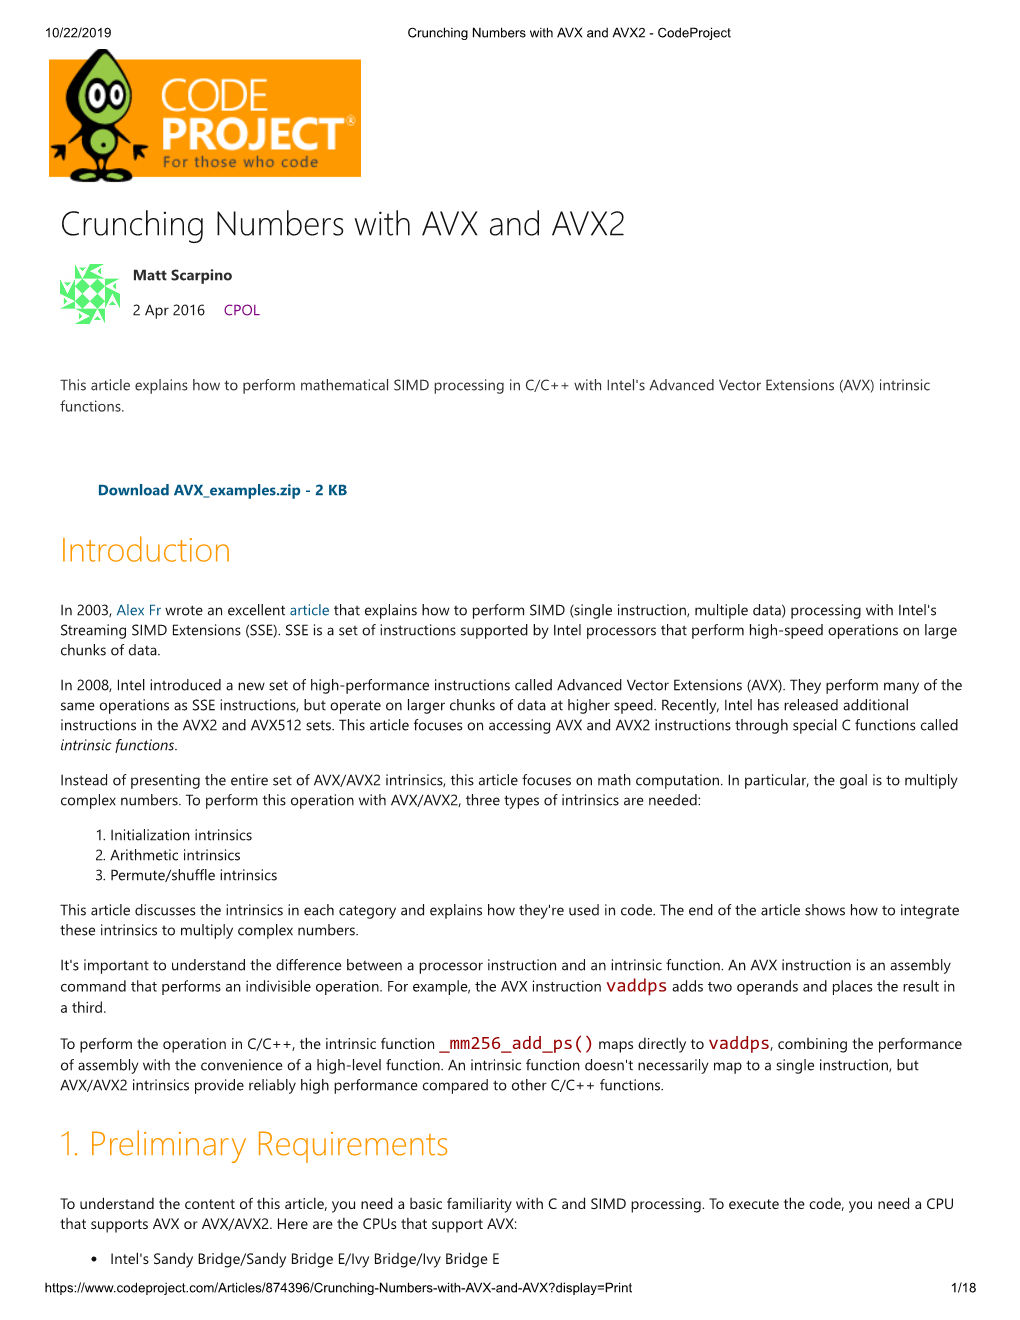 Crunching Numbers with AVX and AVX2 Introduction 1. Preliminary Requirements